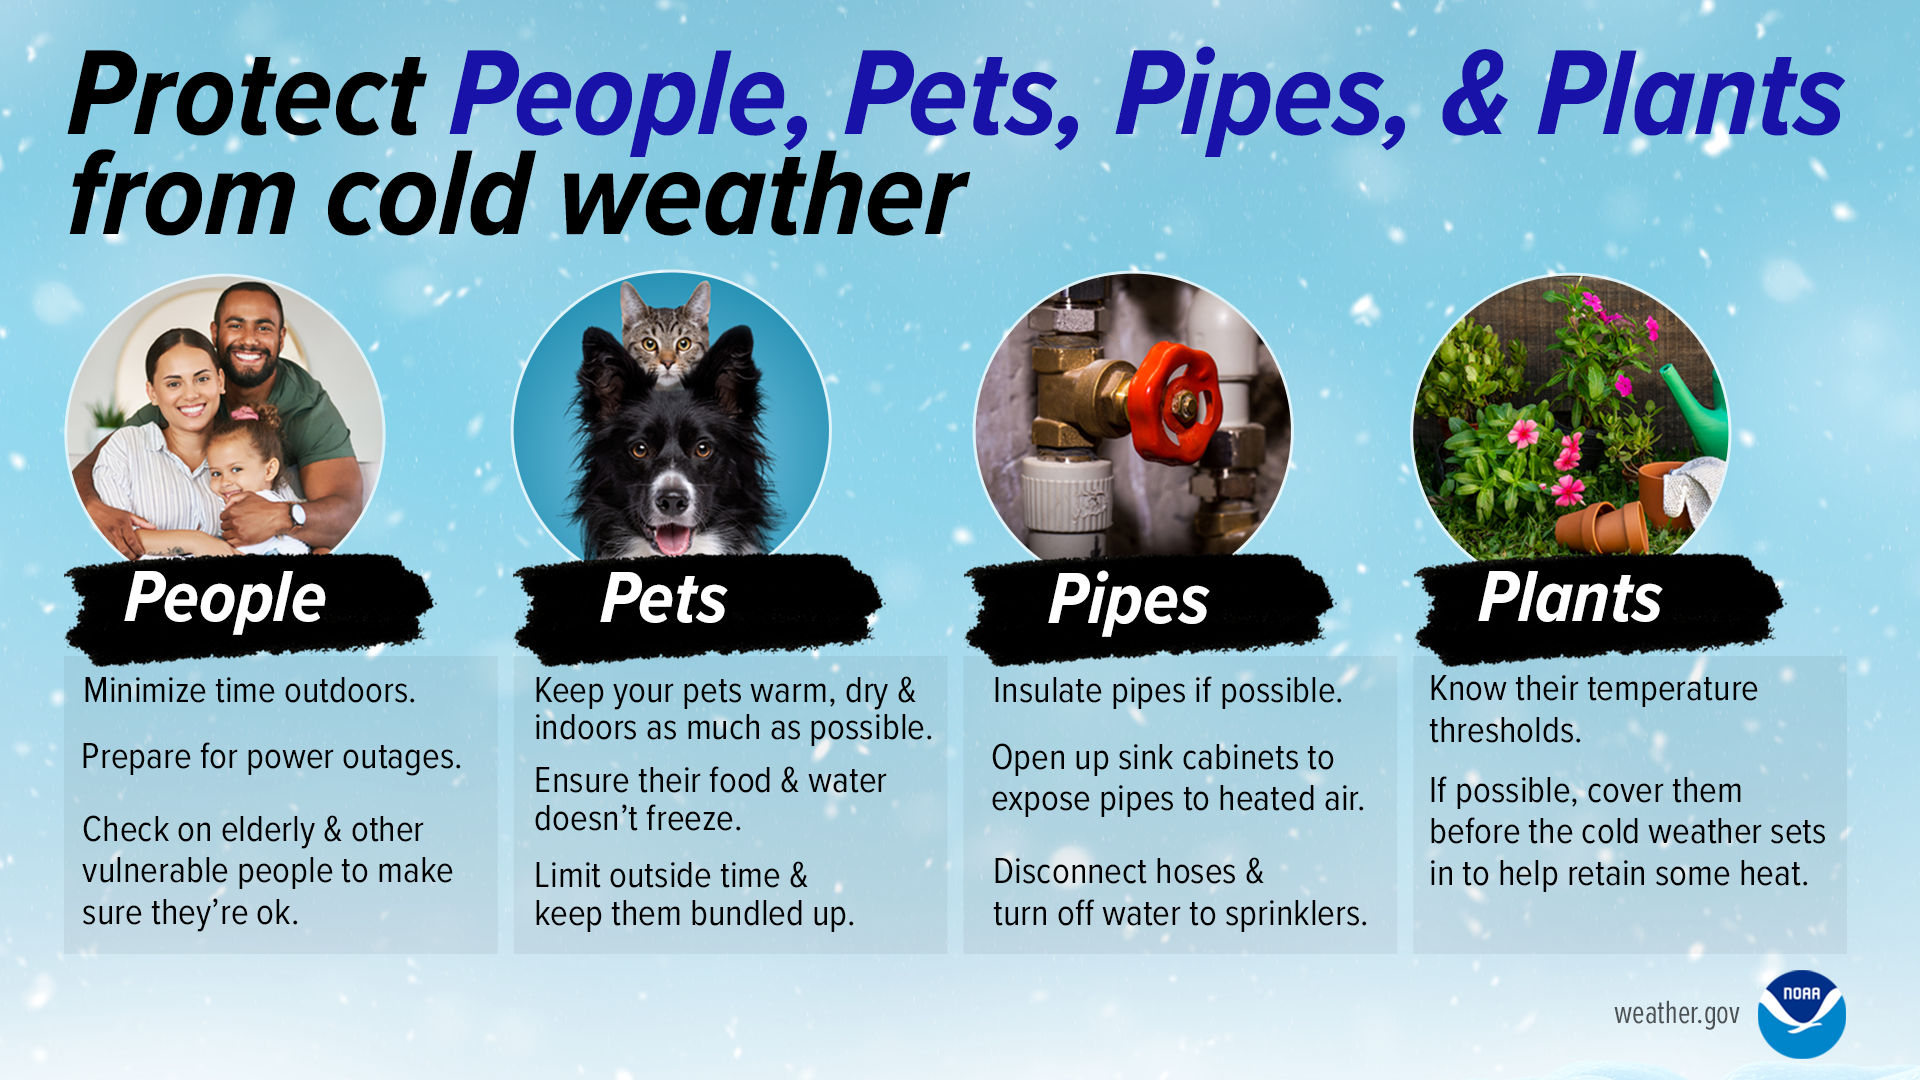 Protect people, pets, pipes and plants from cold weather. People: 1) Minimize time outdoors. 2) Prepare for power outages. 3) Check on the elderly and other vulnerable people to make sure they're ok. Pets: 1) Keep your pets warm, dry and indoors as much as possible. 2) Ensure their food and water doesn't freeze. 3) Limit outside time and keep them bundled up. Pipes: 1) Insulate pipes if possible. 2) Open up sink cabinets to expose pipes to heated air. 3) Disconnect hoses & turn off water to sprinklers. Plants: 1) Know their temperature thresholds. 2) If possible, cover them before the cold weather sets in to help retain some heat.